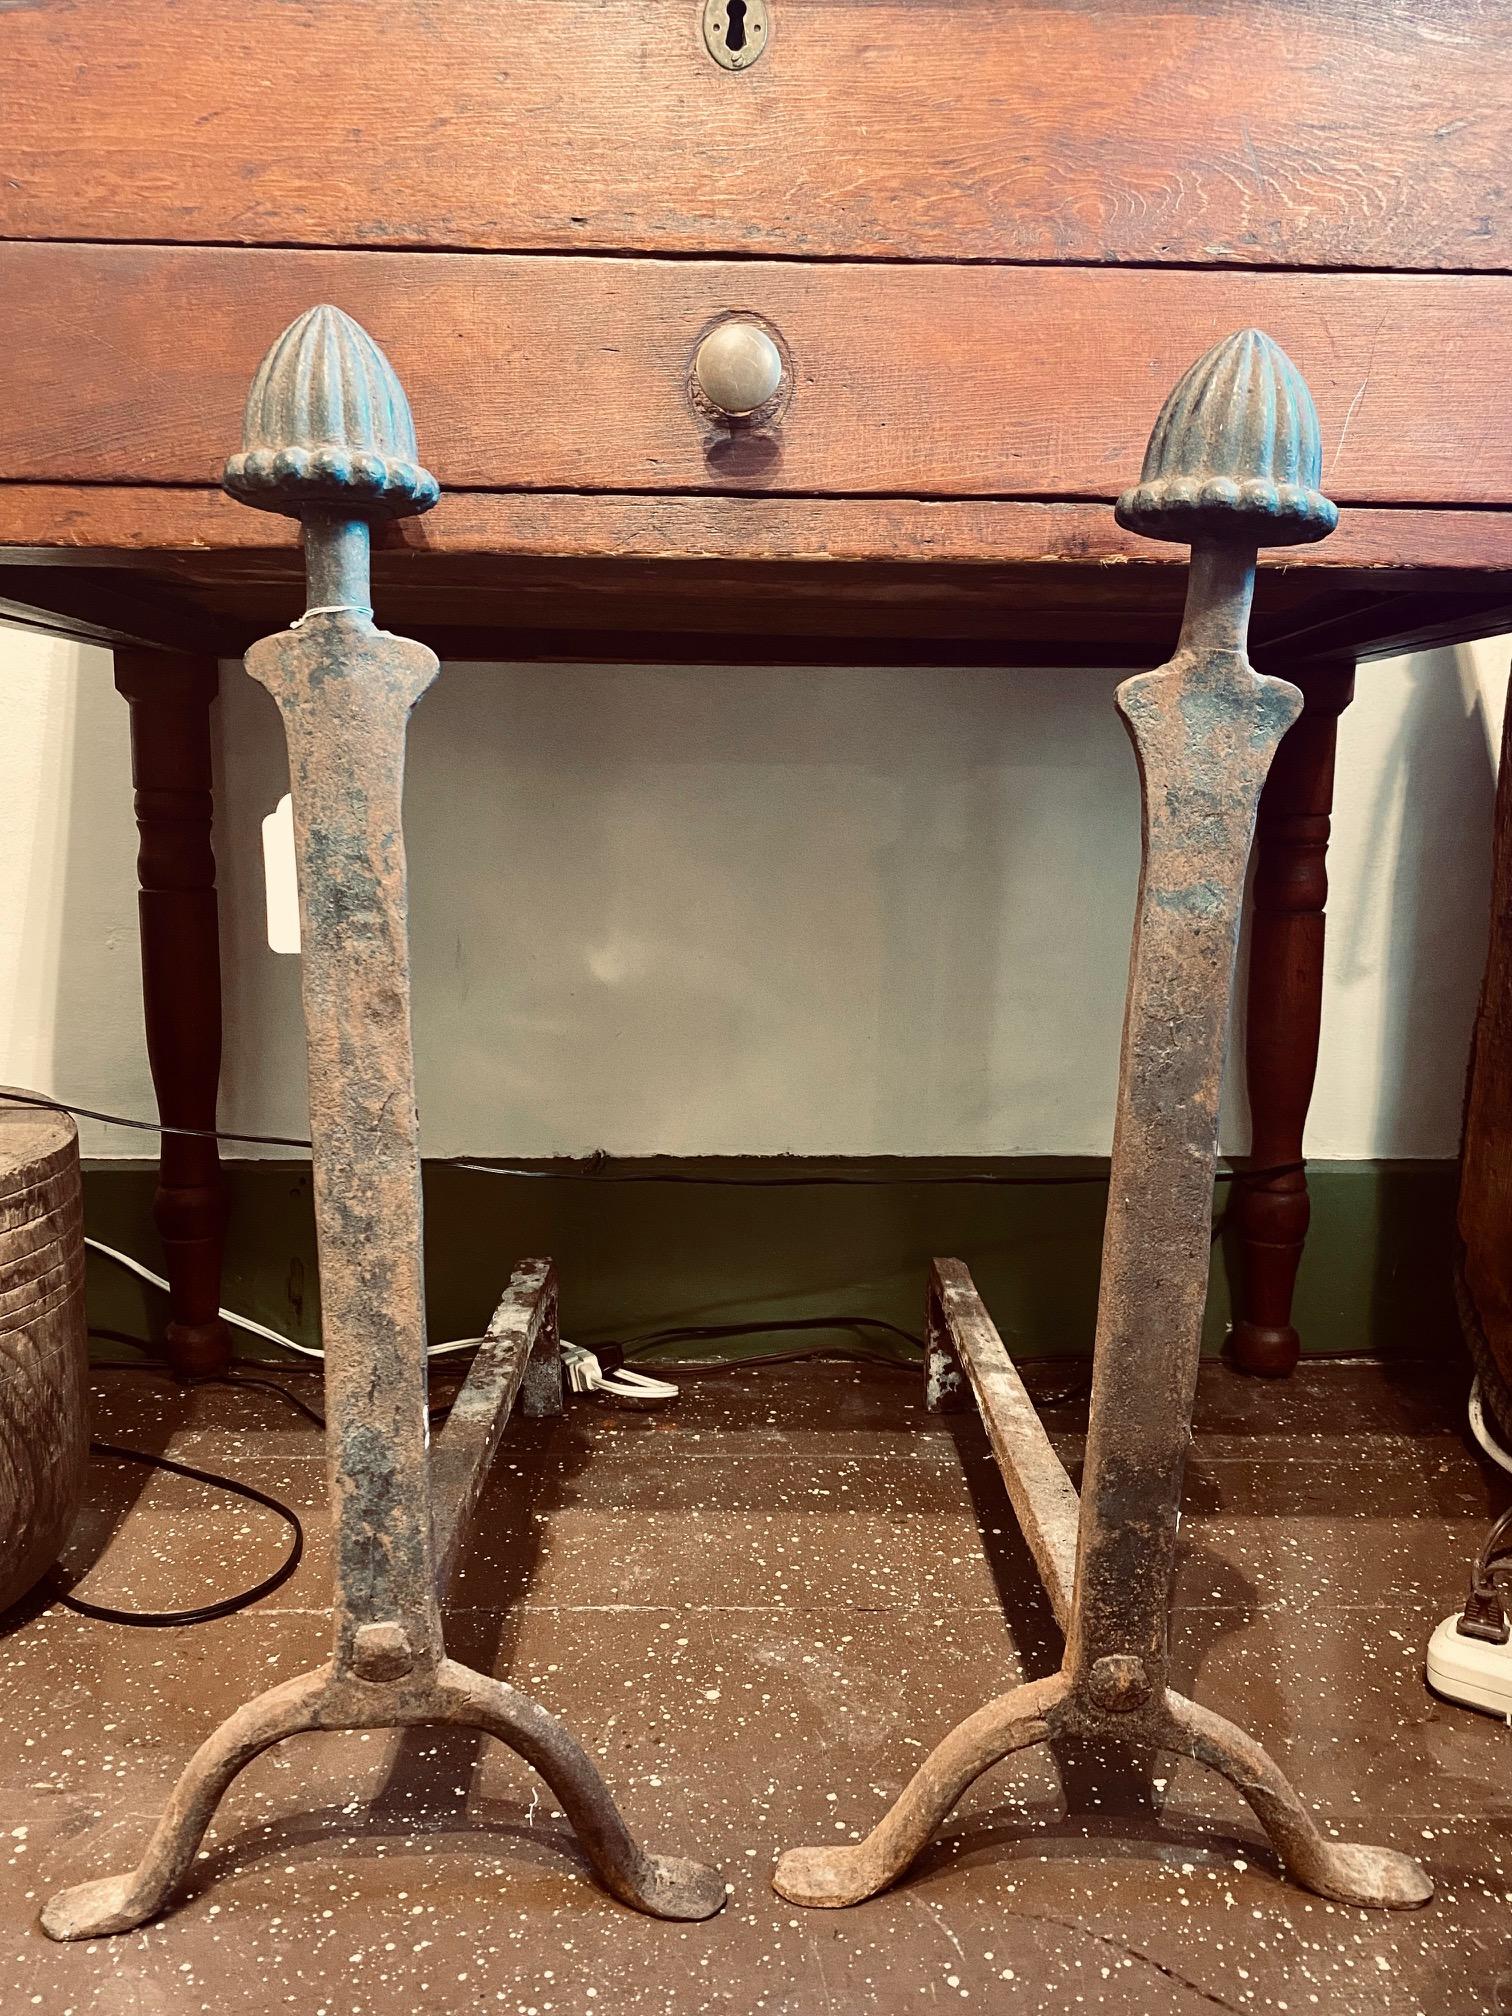 Pair of Late Colonial or Early Federal Iron Acorn Finial Andirons, circa 1800, an unusual and impressively large pair of cast iron andirons with a large fluted acorn finial atop a heavy knife blade standard, raised on arched legs ending in penny